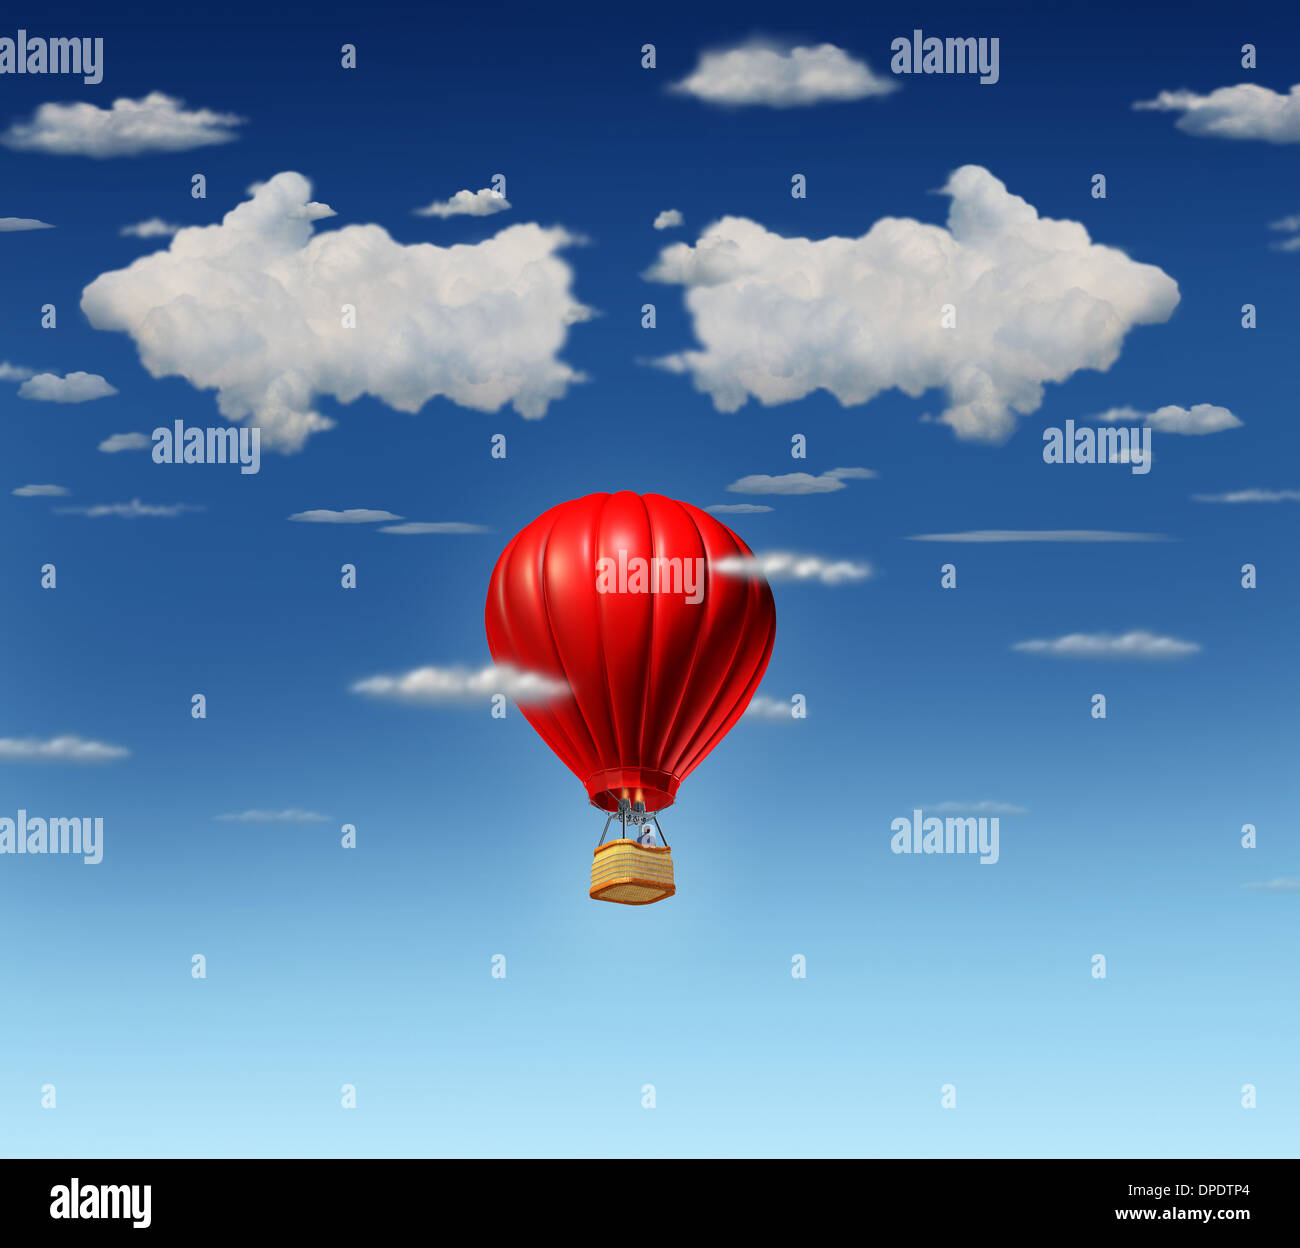 Success choice business concept as a red air balloon with a businessman pilot flying up and facing a difficult direction dilemma with clouds shaped as opposite pointing arrows in the sky. Stock Photo